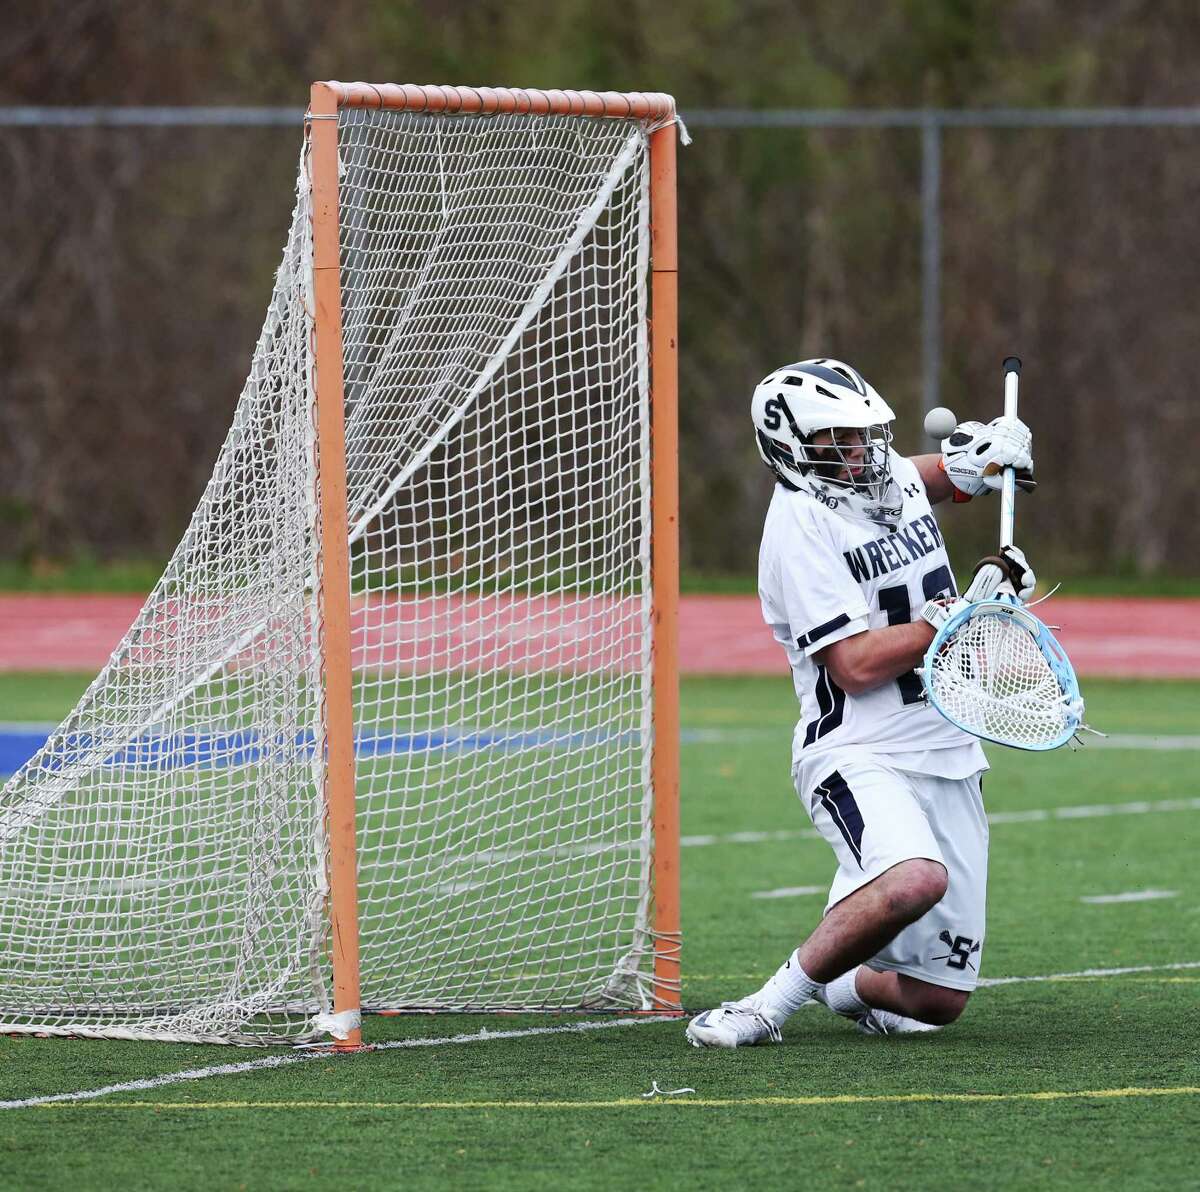 Mike Ross Connecticut Post freelance -Staples High School's goalie #12 Cole Gendels protects the goal and make a save during Tuesday afternoon match-up against Darien High School.